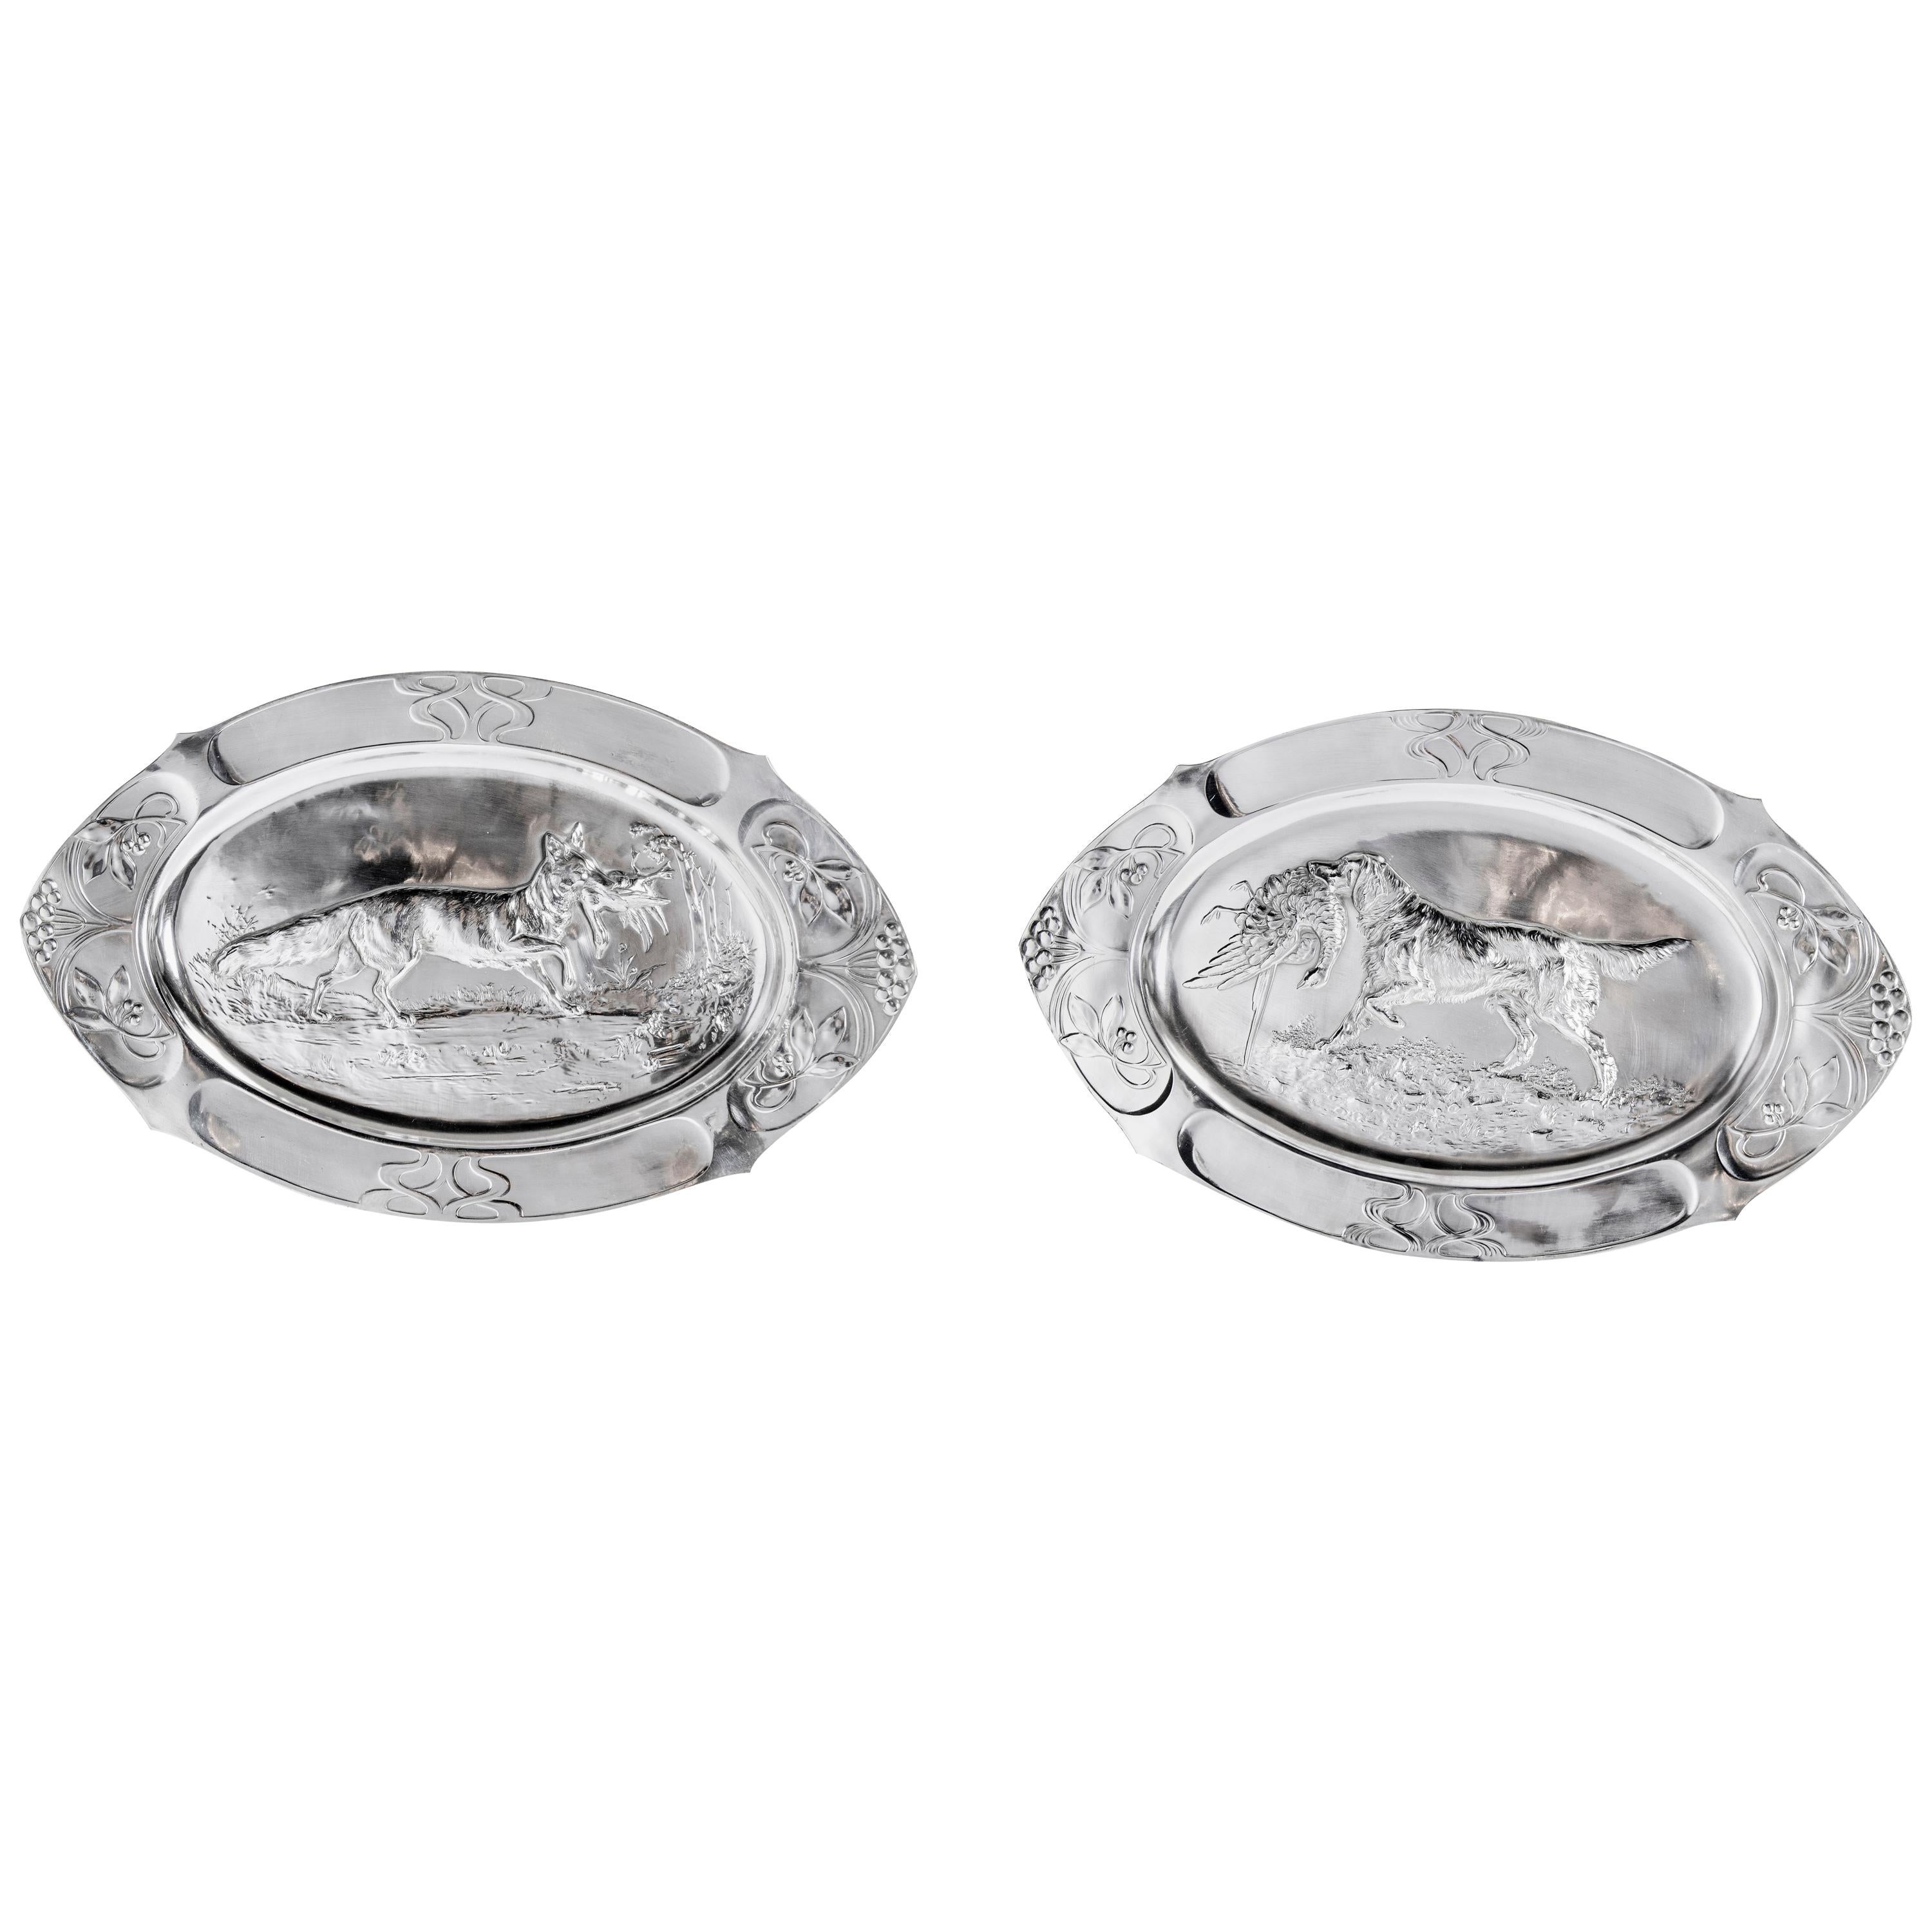 Pair of W.M.F. Silver Plate Dishes, Jugendstil Period, circa 1900 For Sale